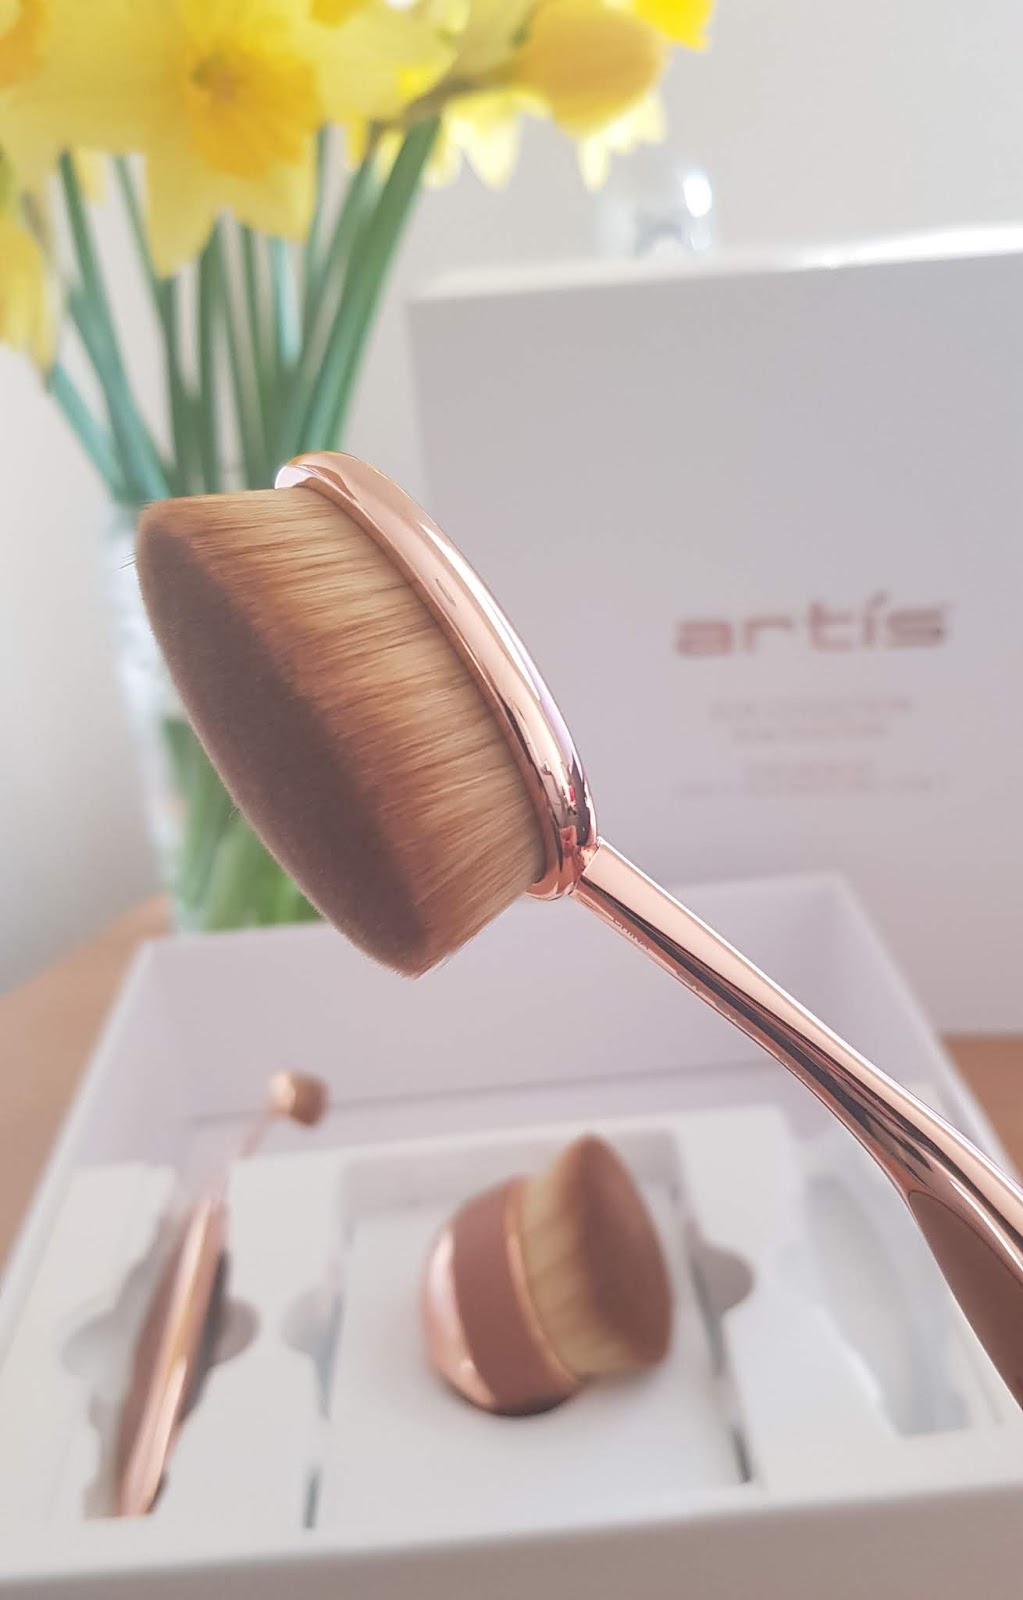 Artis rose gold make-up brushes, photographed by Is This Mutton